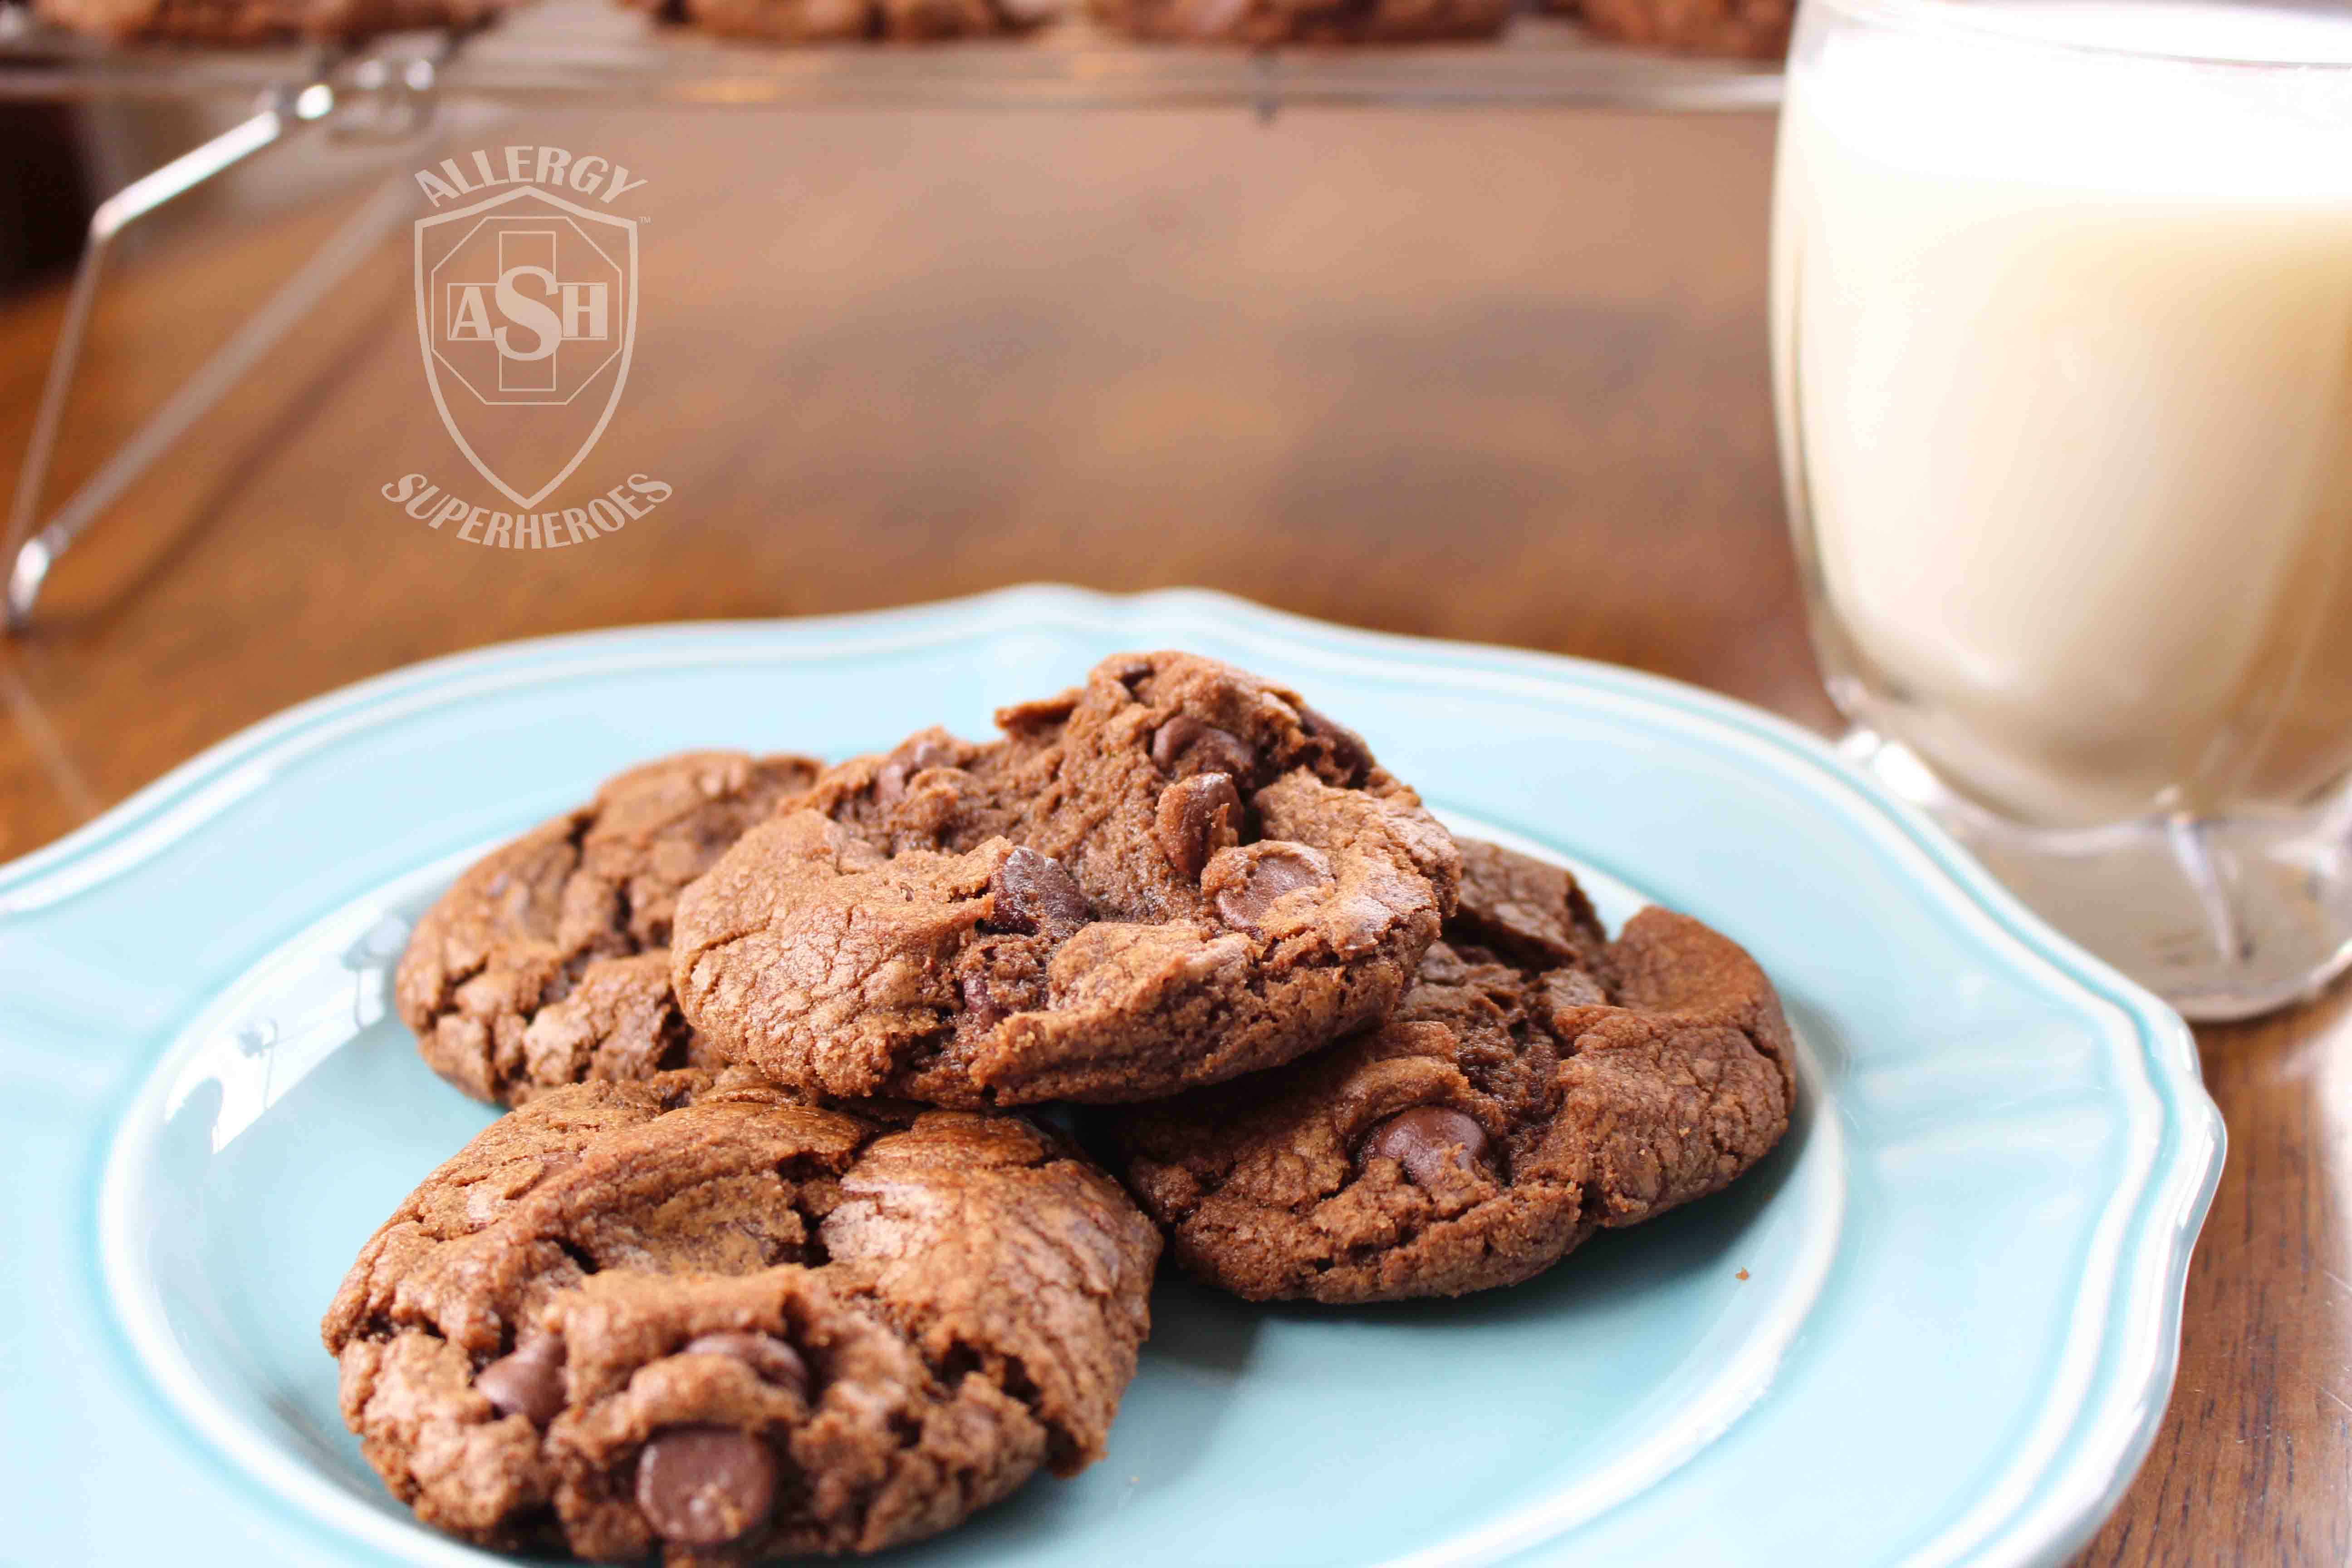 Chocolate Chocolate Chip Cookies from Allergy Superheroes | Chocolately and Delicious!